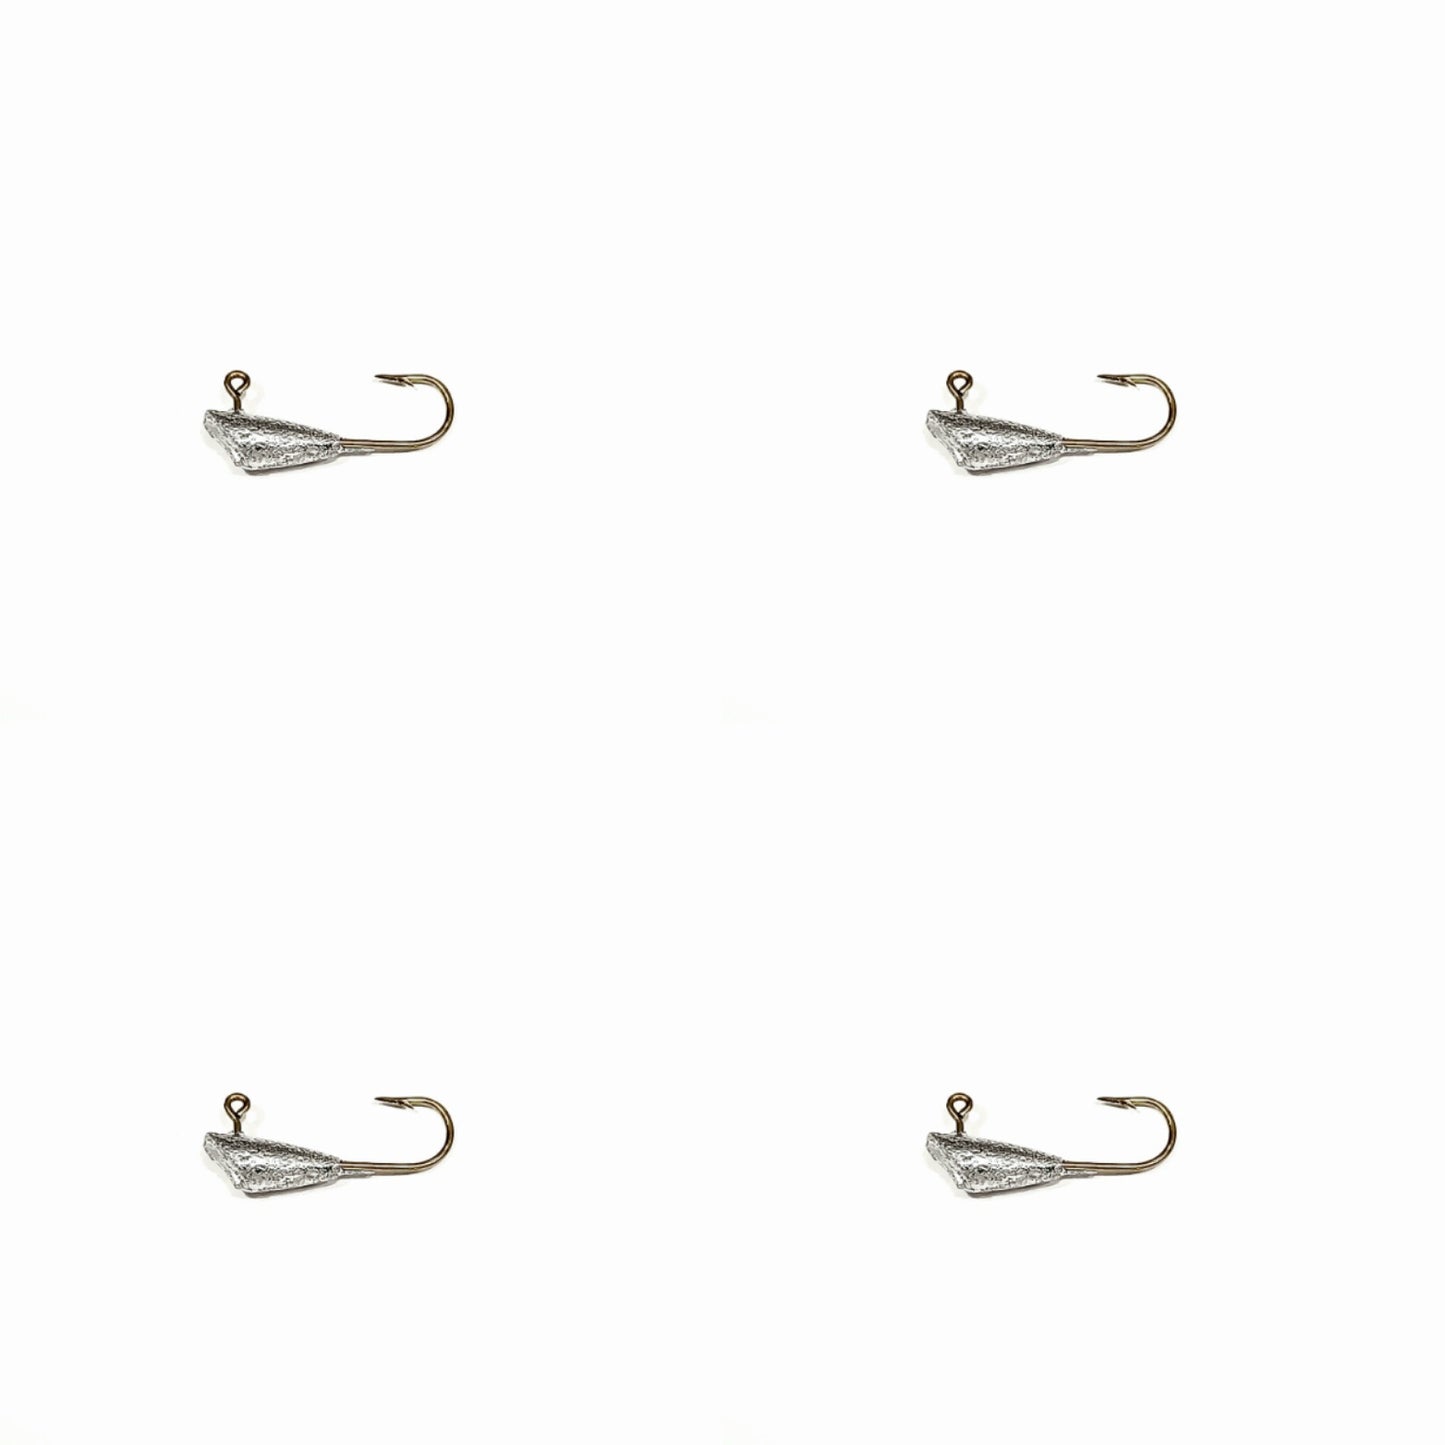 Ultra Micro Finesse SHAD DART Jig Heads (size: 1/64 oz) our ultra light line series tackle